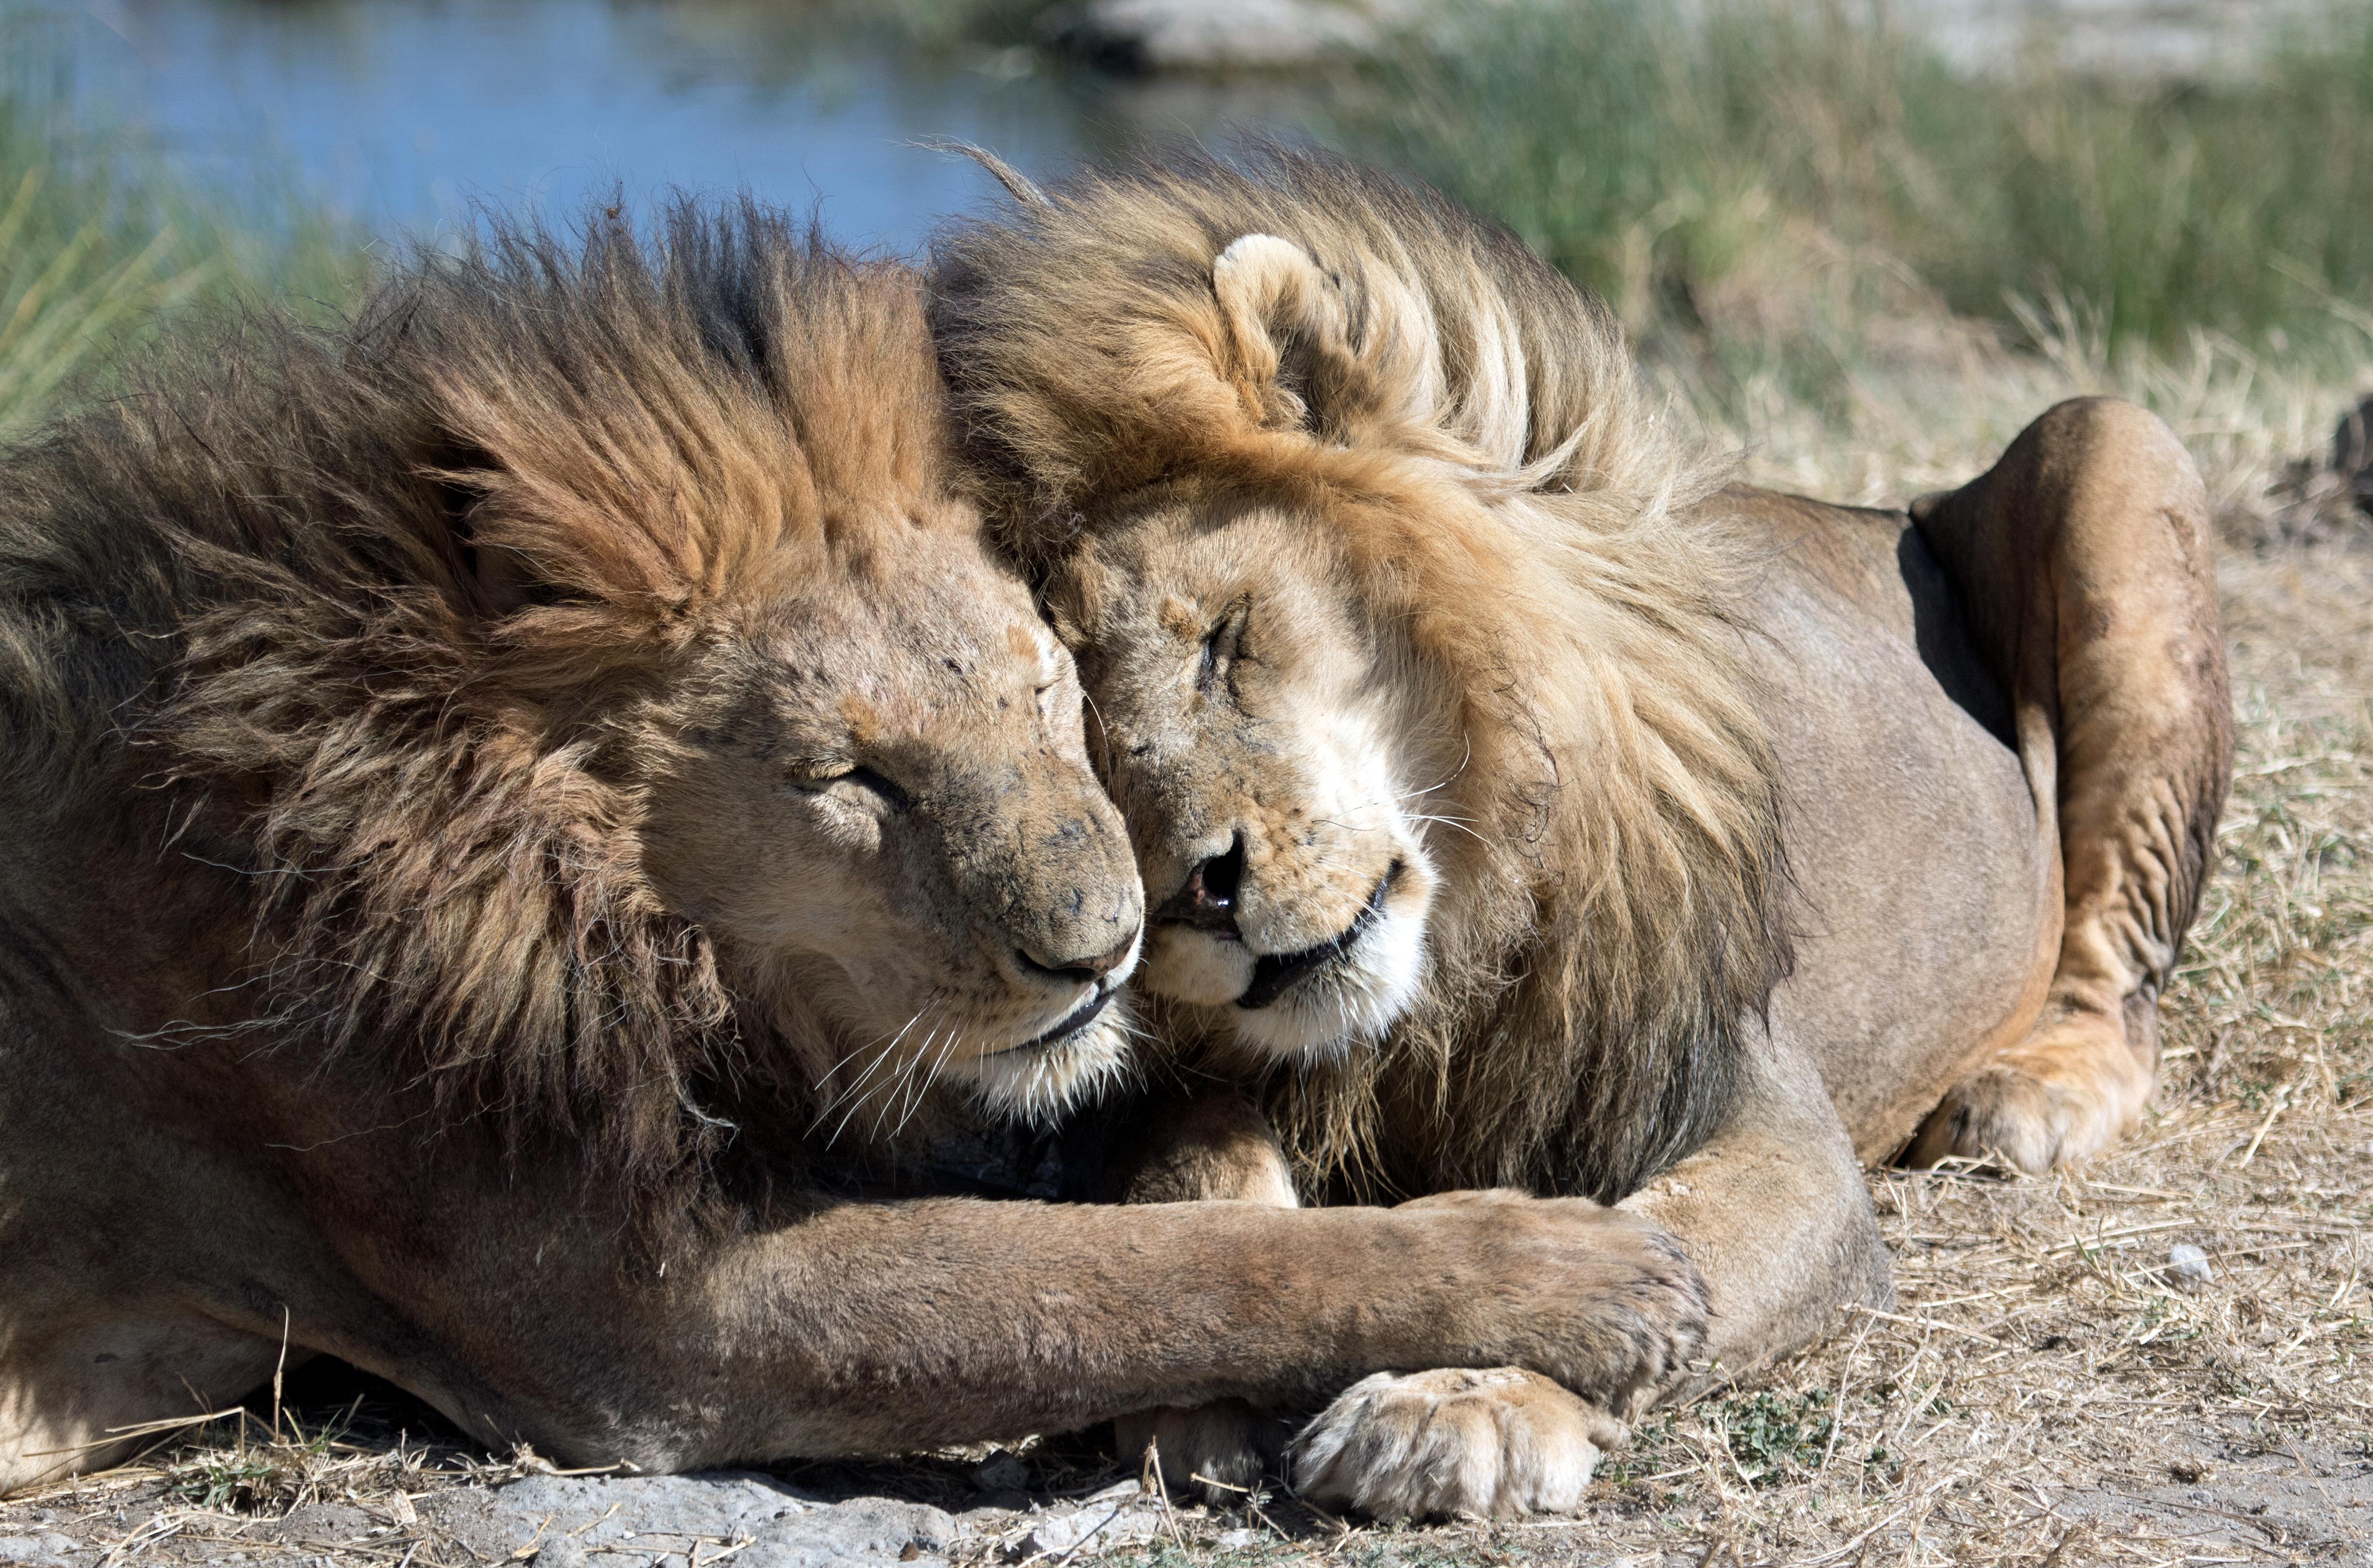 Two lions (Panthera leo) sleeping in the Serengeti National Park, Tanzania, Africa